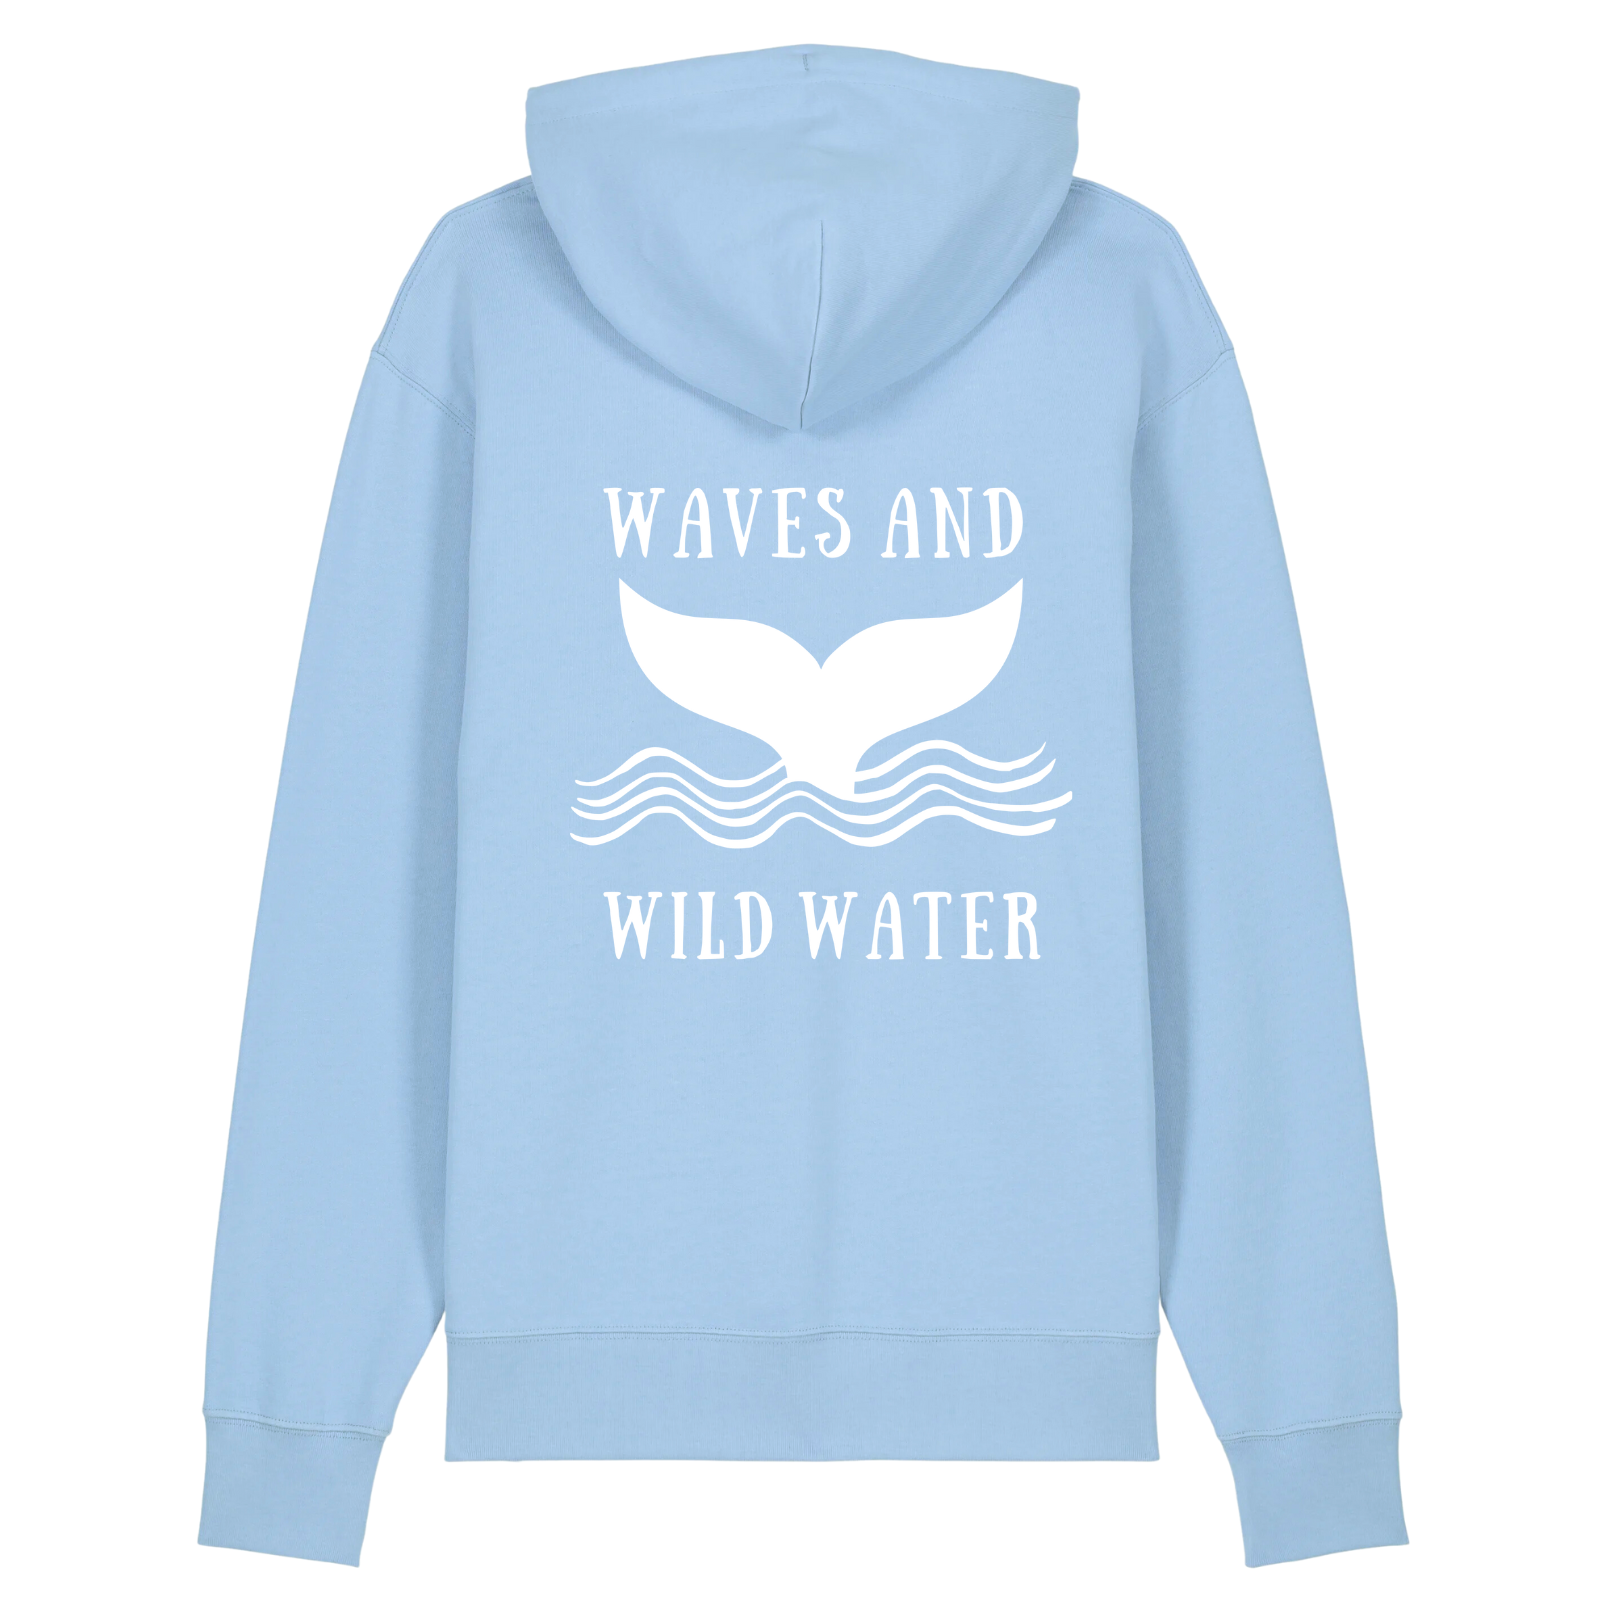 This sky blue hoodie from the Beach Hut Hoodies collection with a white hand printed Waves and Wild Water logo on the back, is just perfect for us to pop on after a bracing cold water swim.